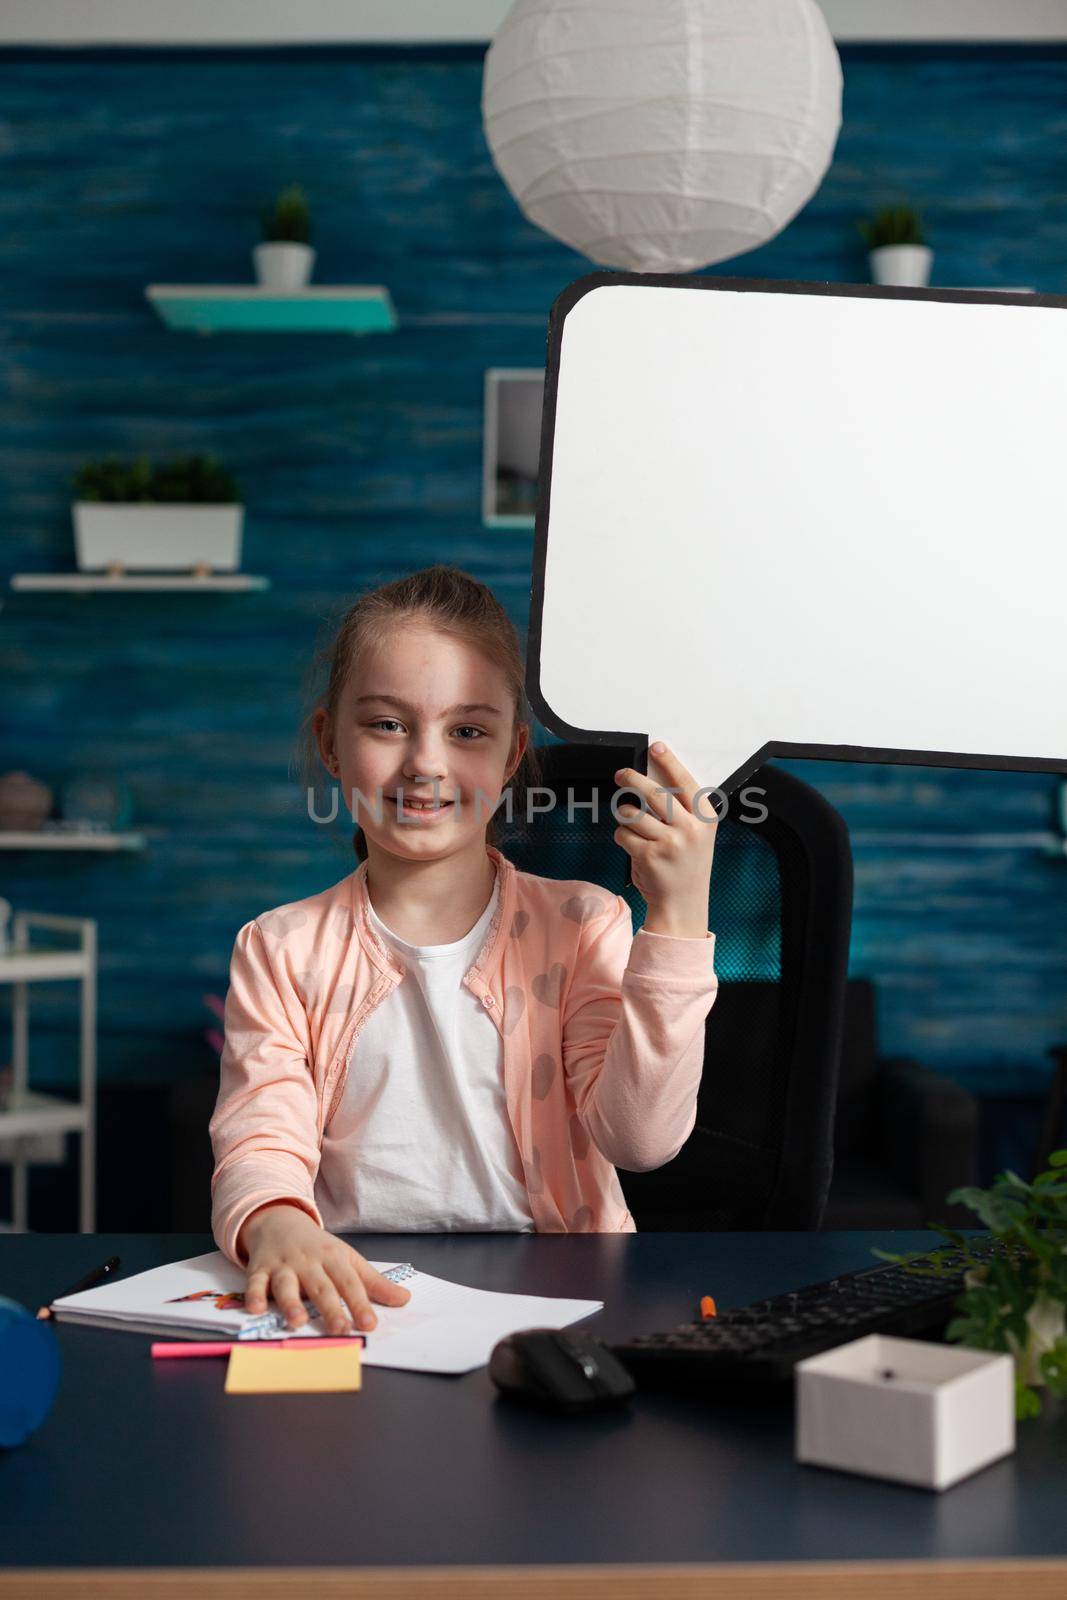 Portrait of smiling little schoolchild holding white board looking into camera during virtual school lesson in living room. Concept of home schooling, distance learning, online education